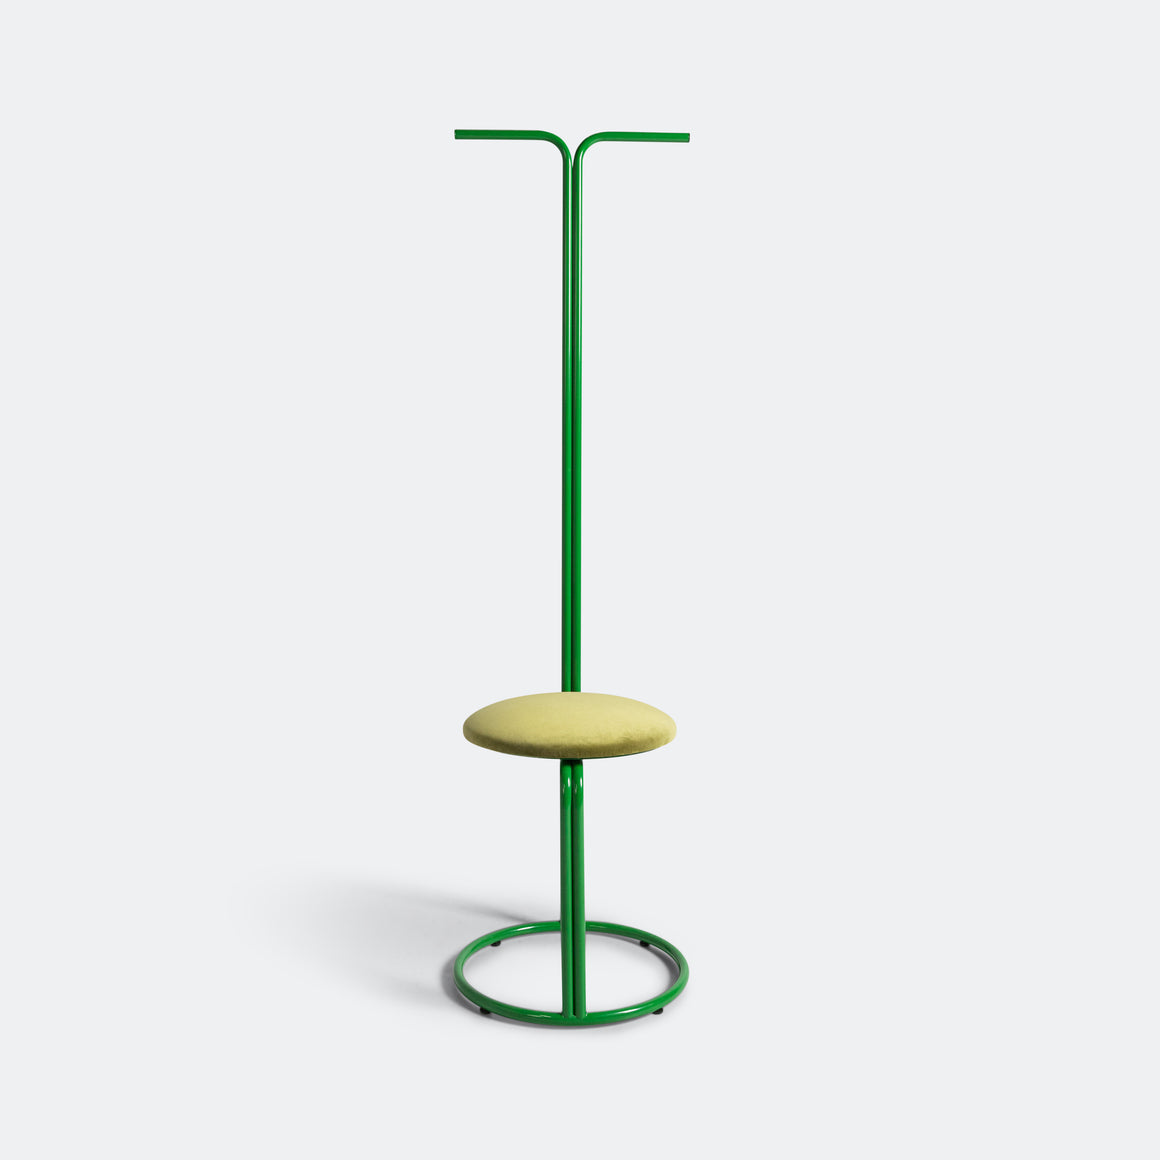 Dowel Jones - VM1200 x UP THERE - Mistletoe Frame - UP THERE